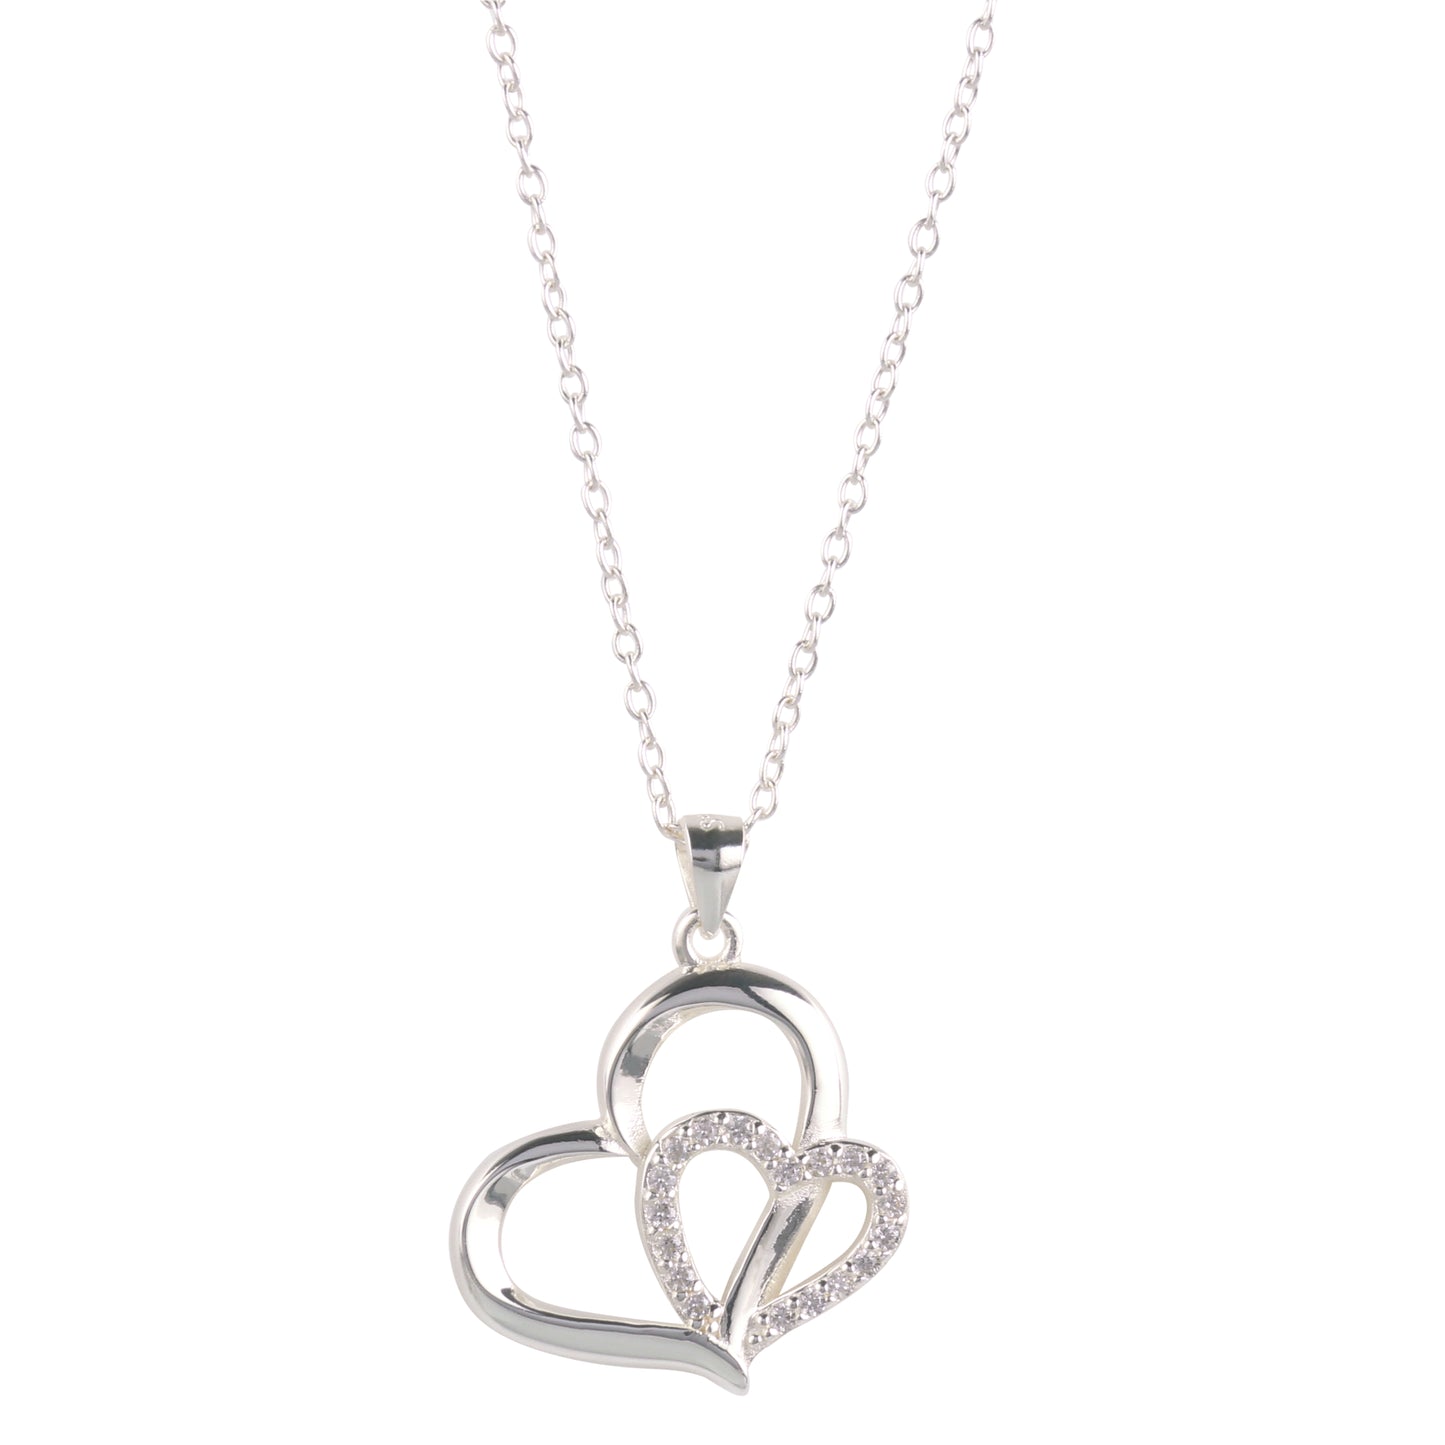 Eternity Love Heart Pave Necklace for Girlfriend